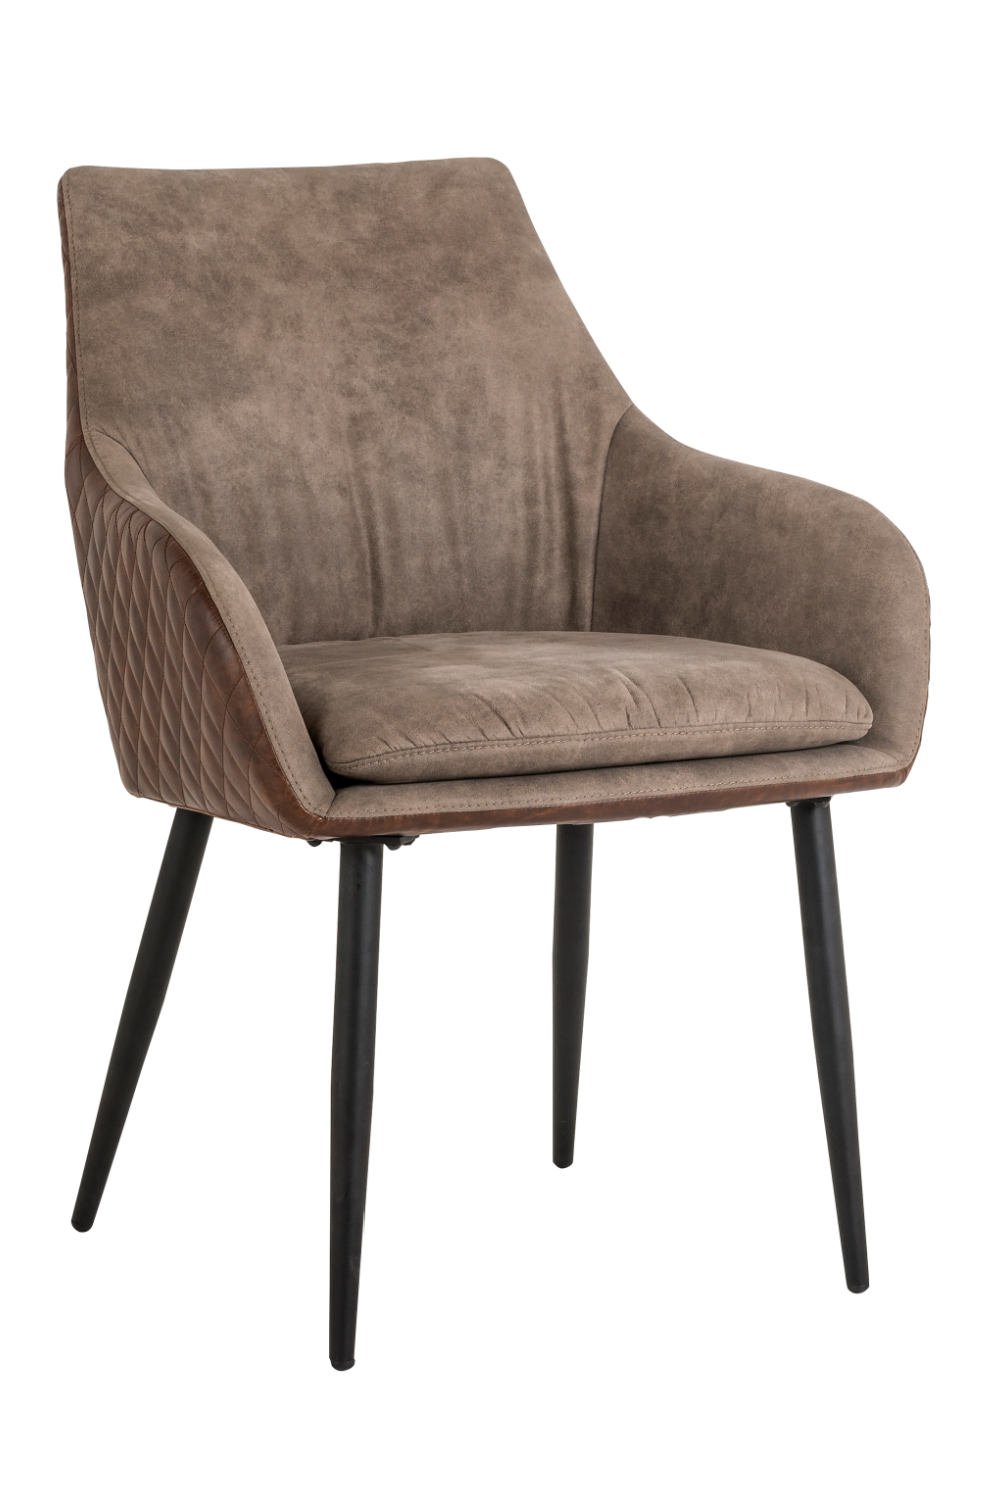 Brown Leather Dining Chair | OROA Chrissy | OROA.com